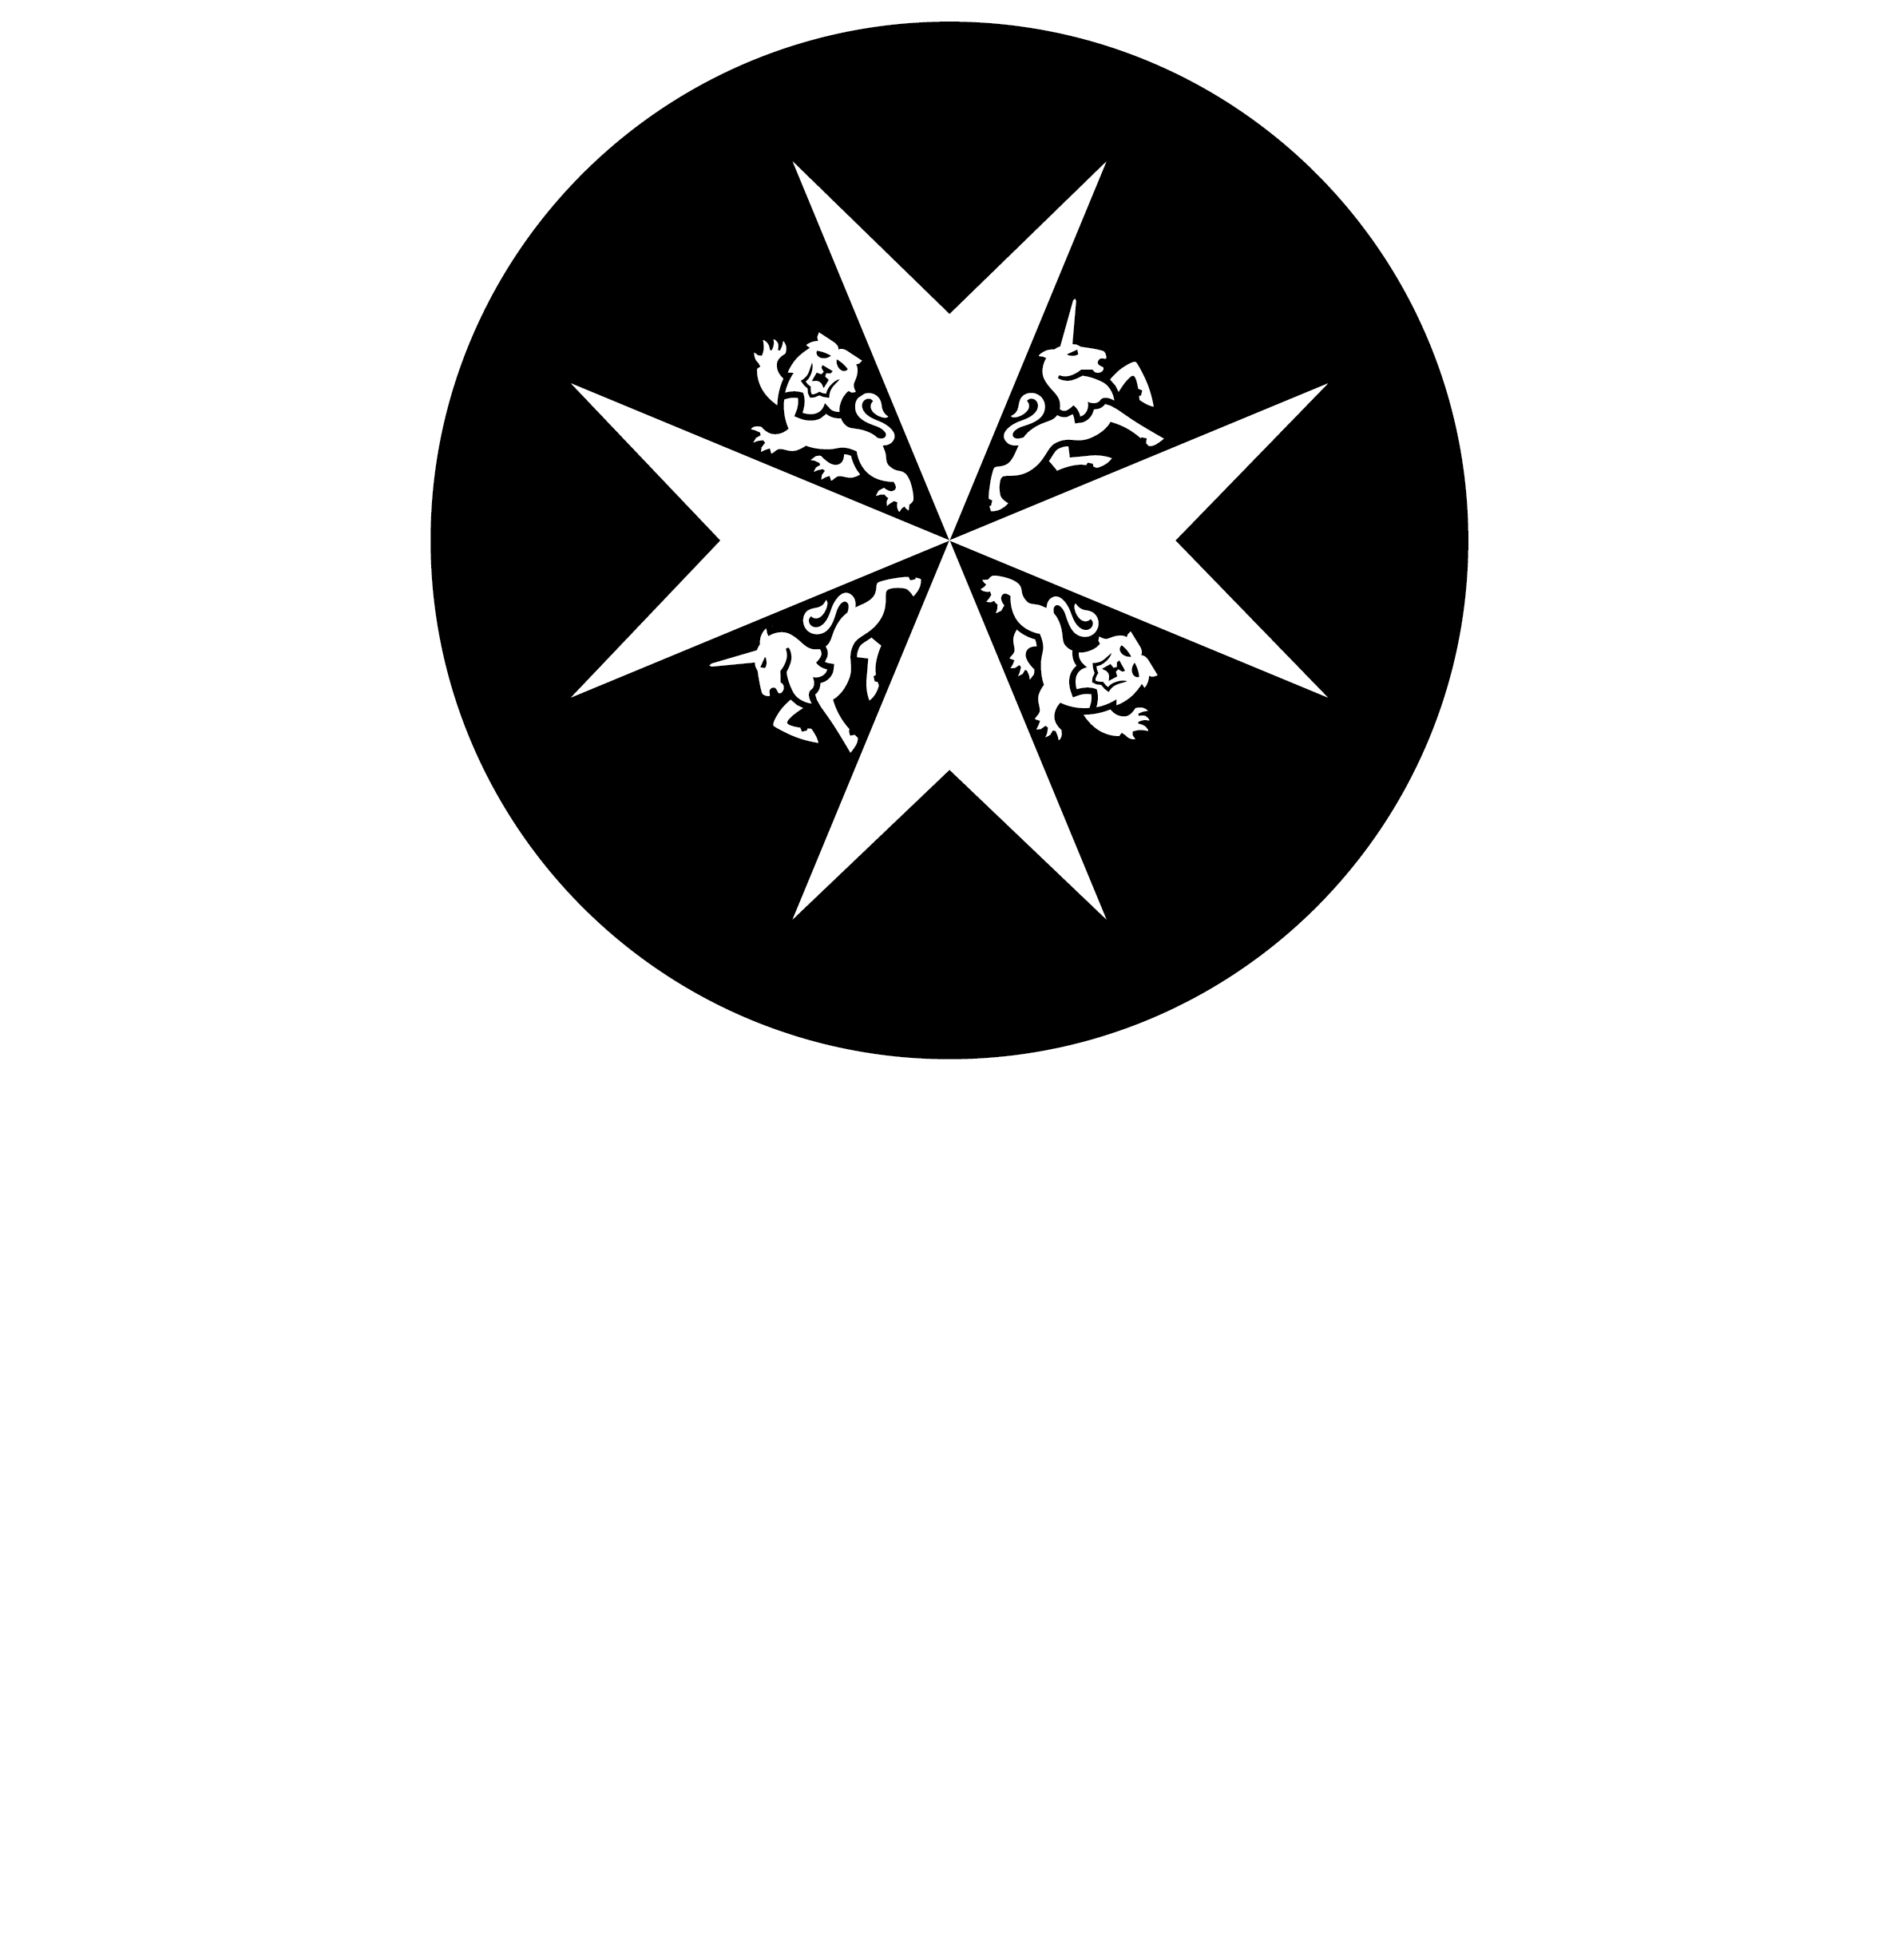 St John Alarms provide support to those who want to keep living independently